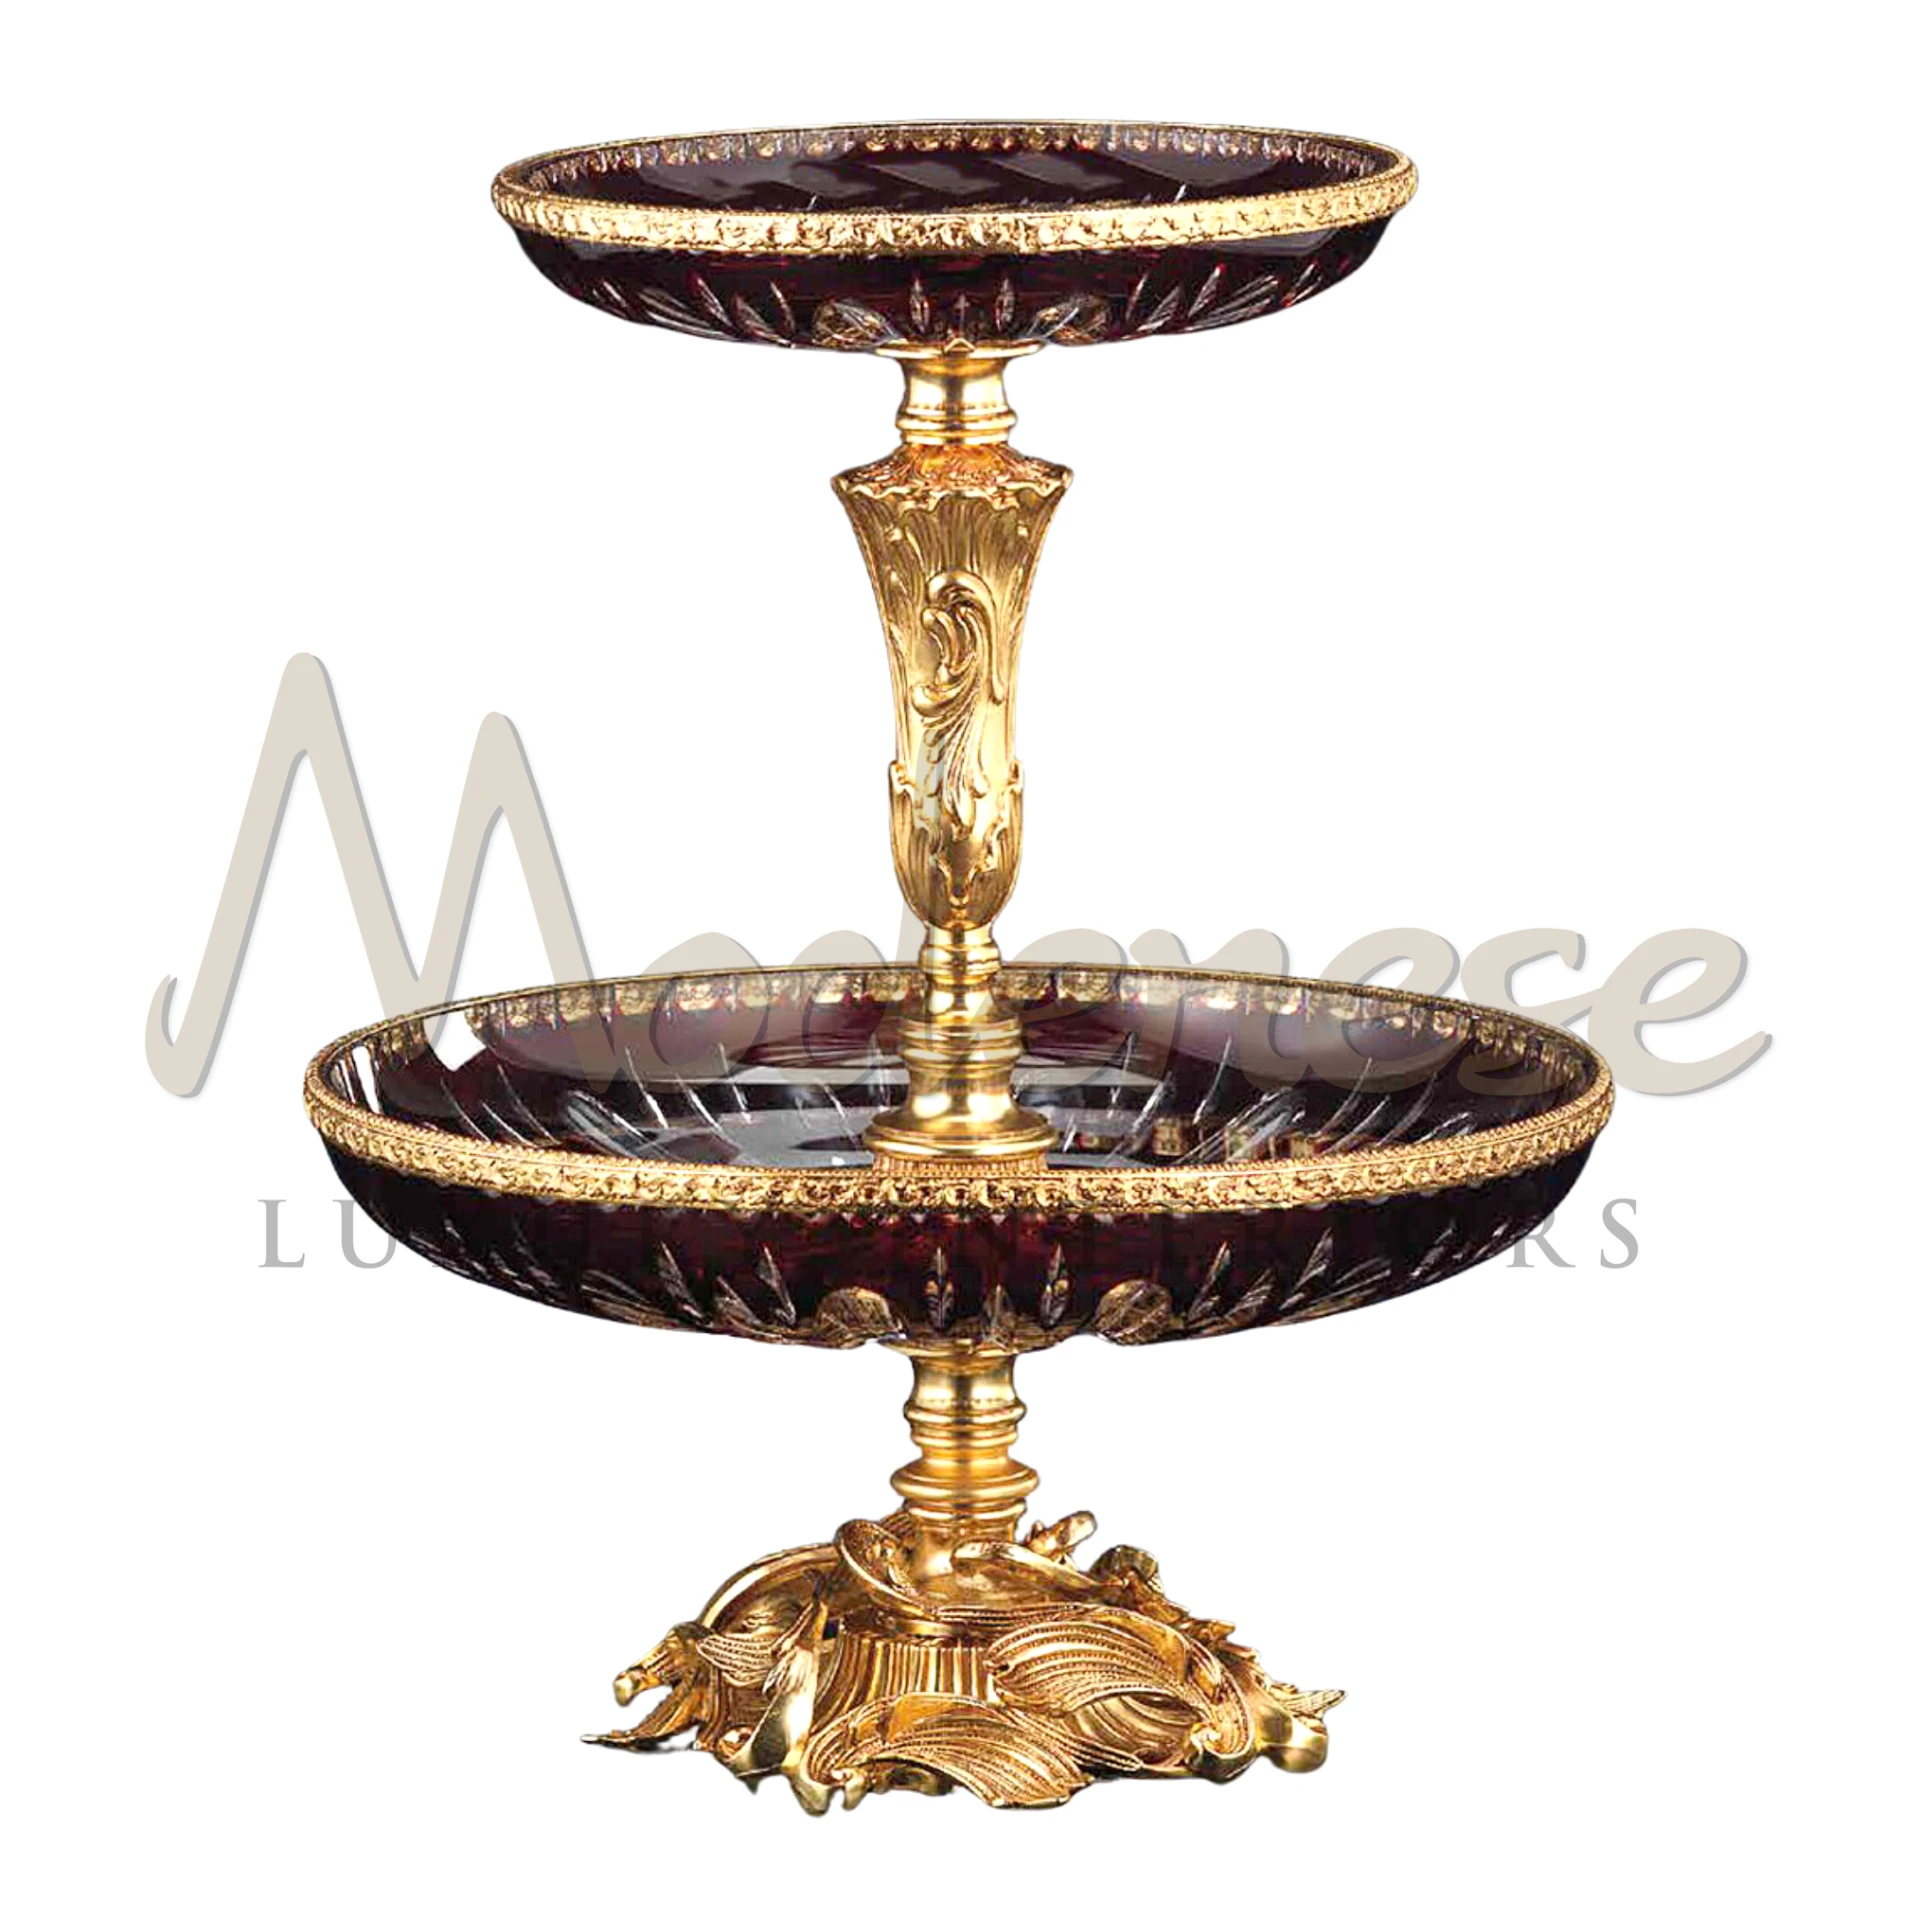 Victorian Dark Glass Bowl, epitomizing luxury and opulence in high-quality glass, perfect for adding a touch of Victorian elegance to interior design.